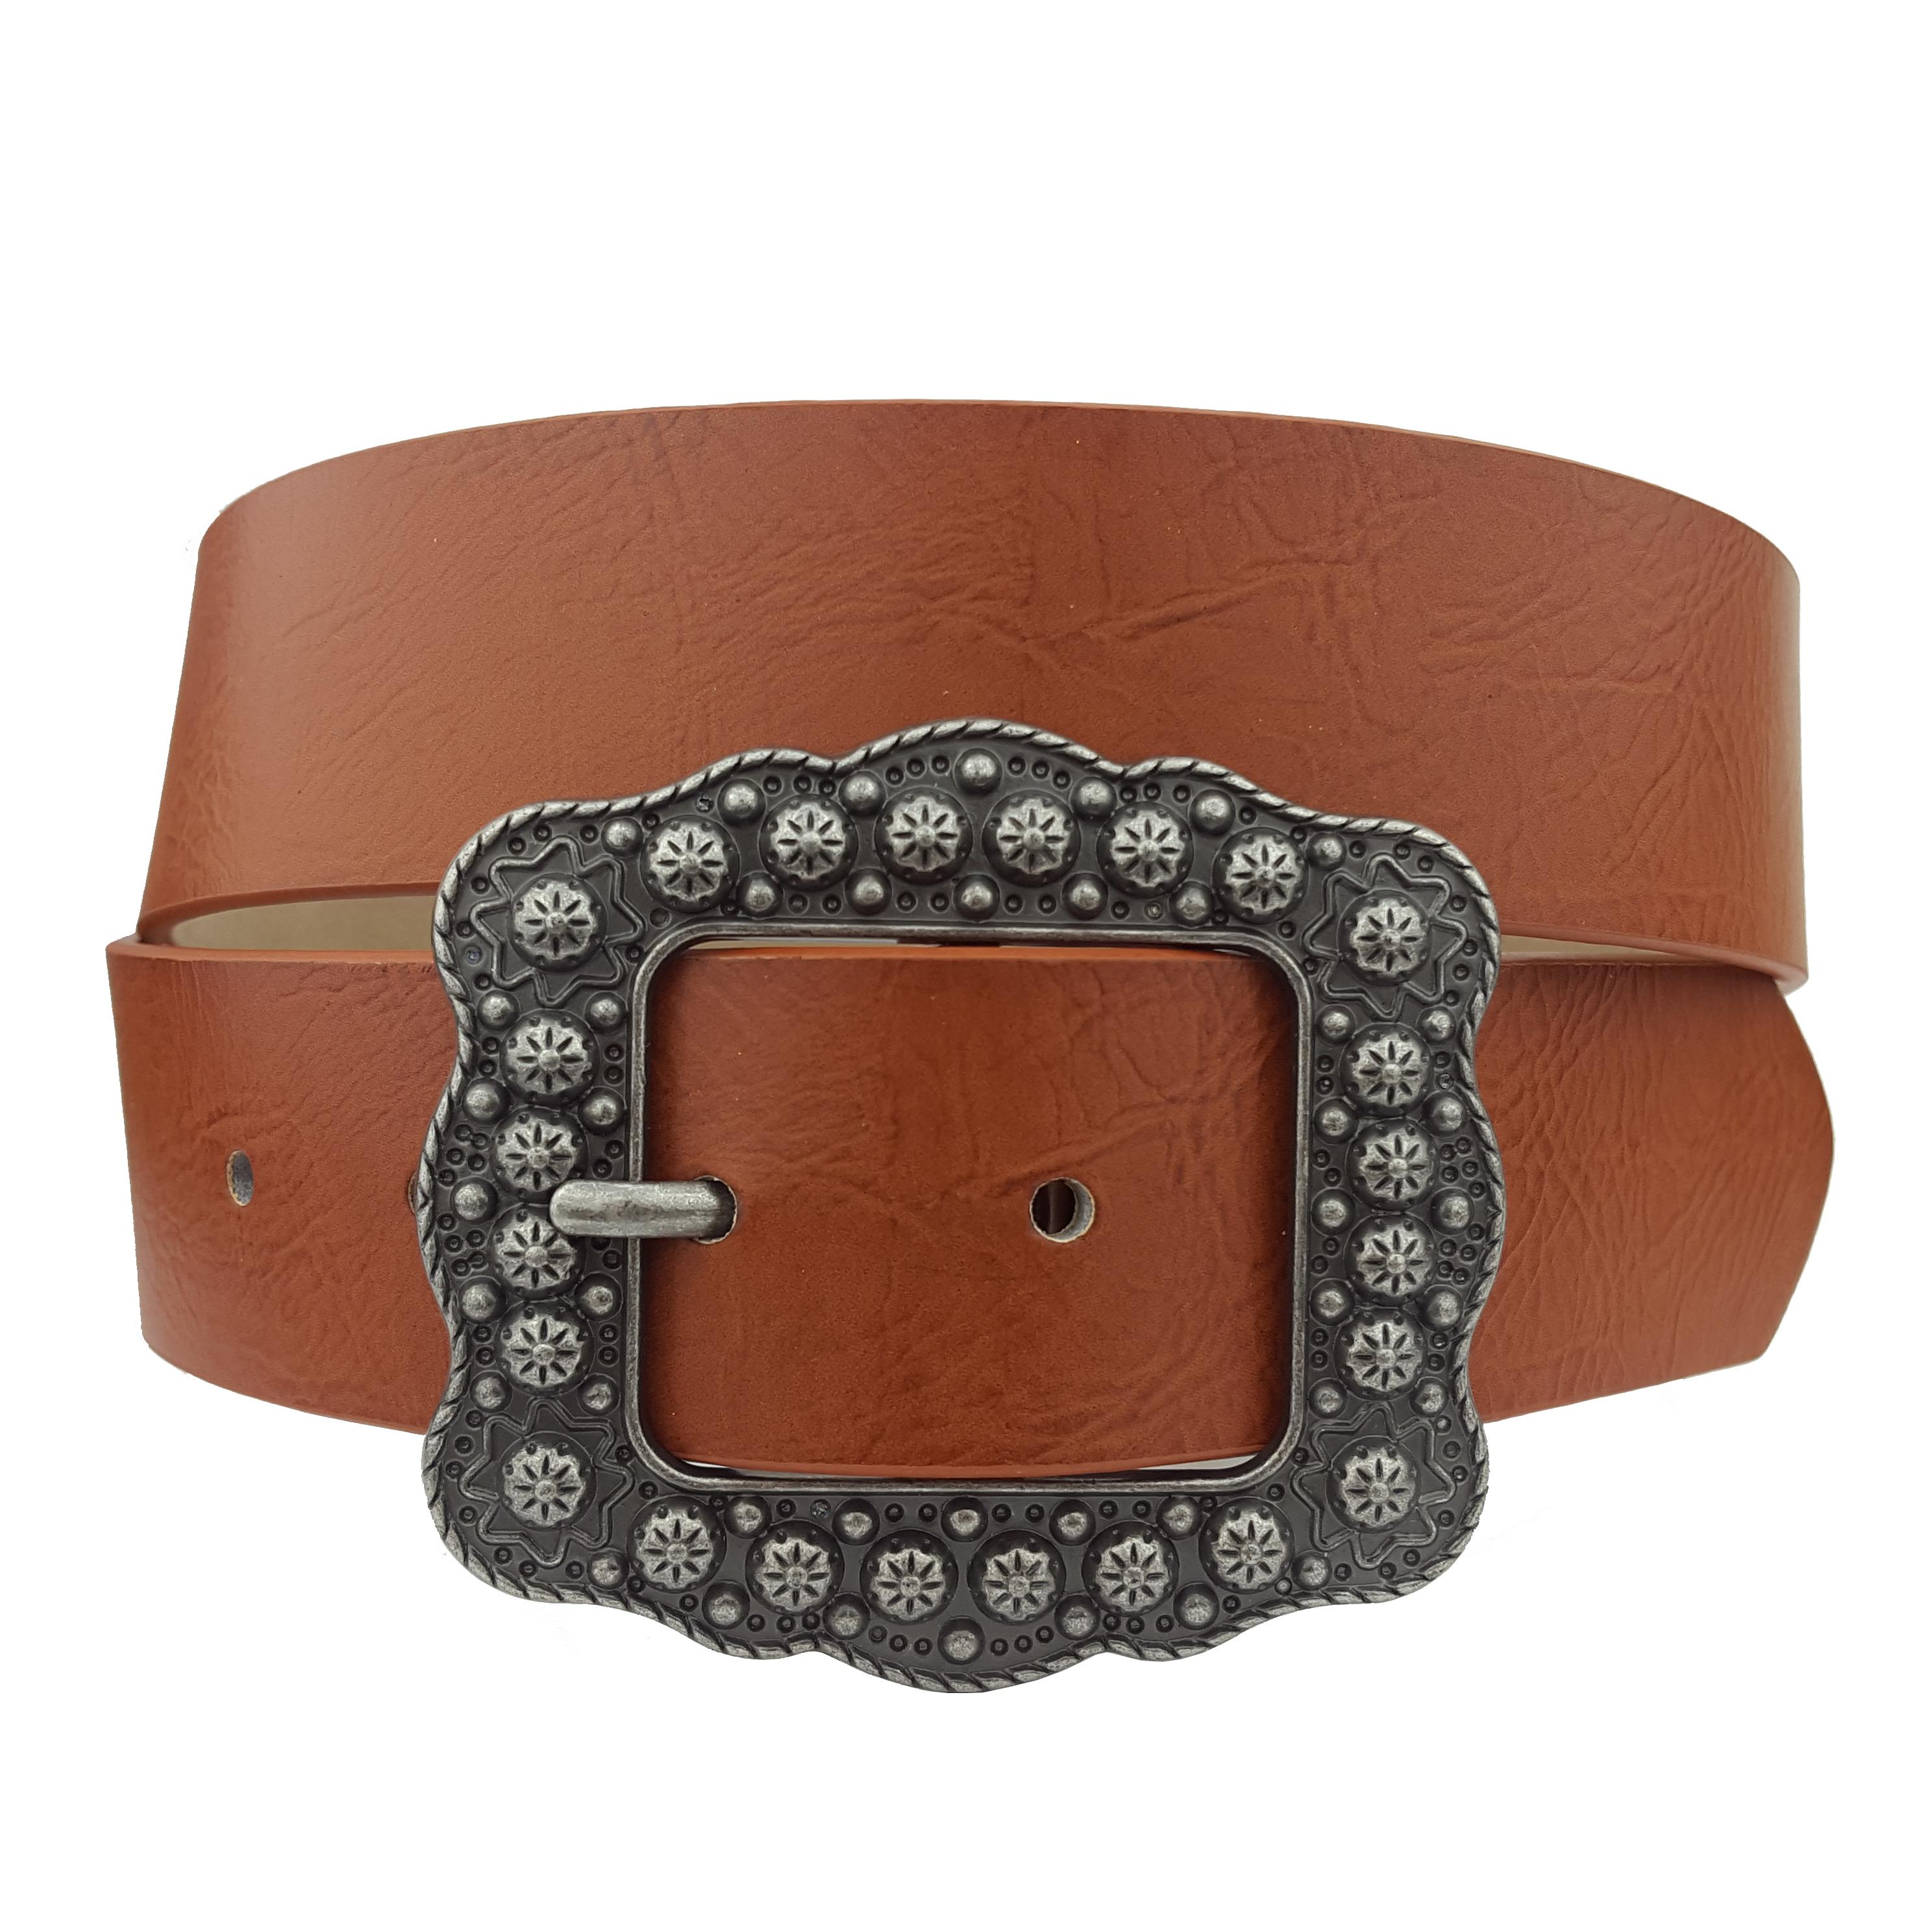 CLASSIC JEAN BELT WITH DARK VINTAGE FINISHED BUCKLE